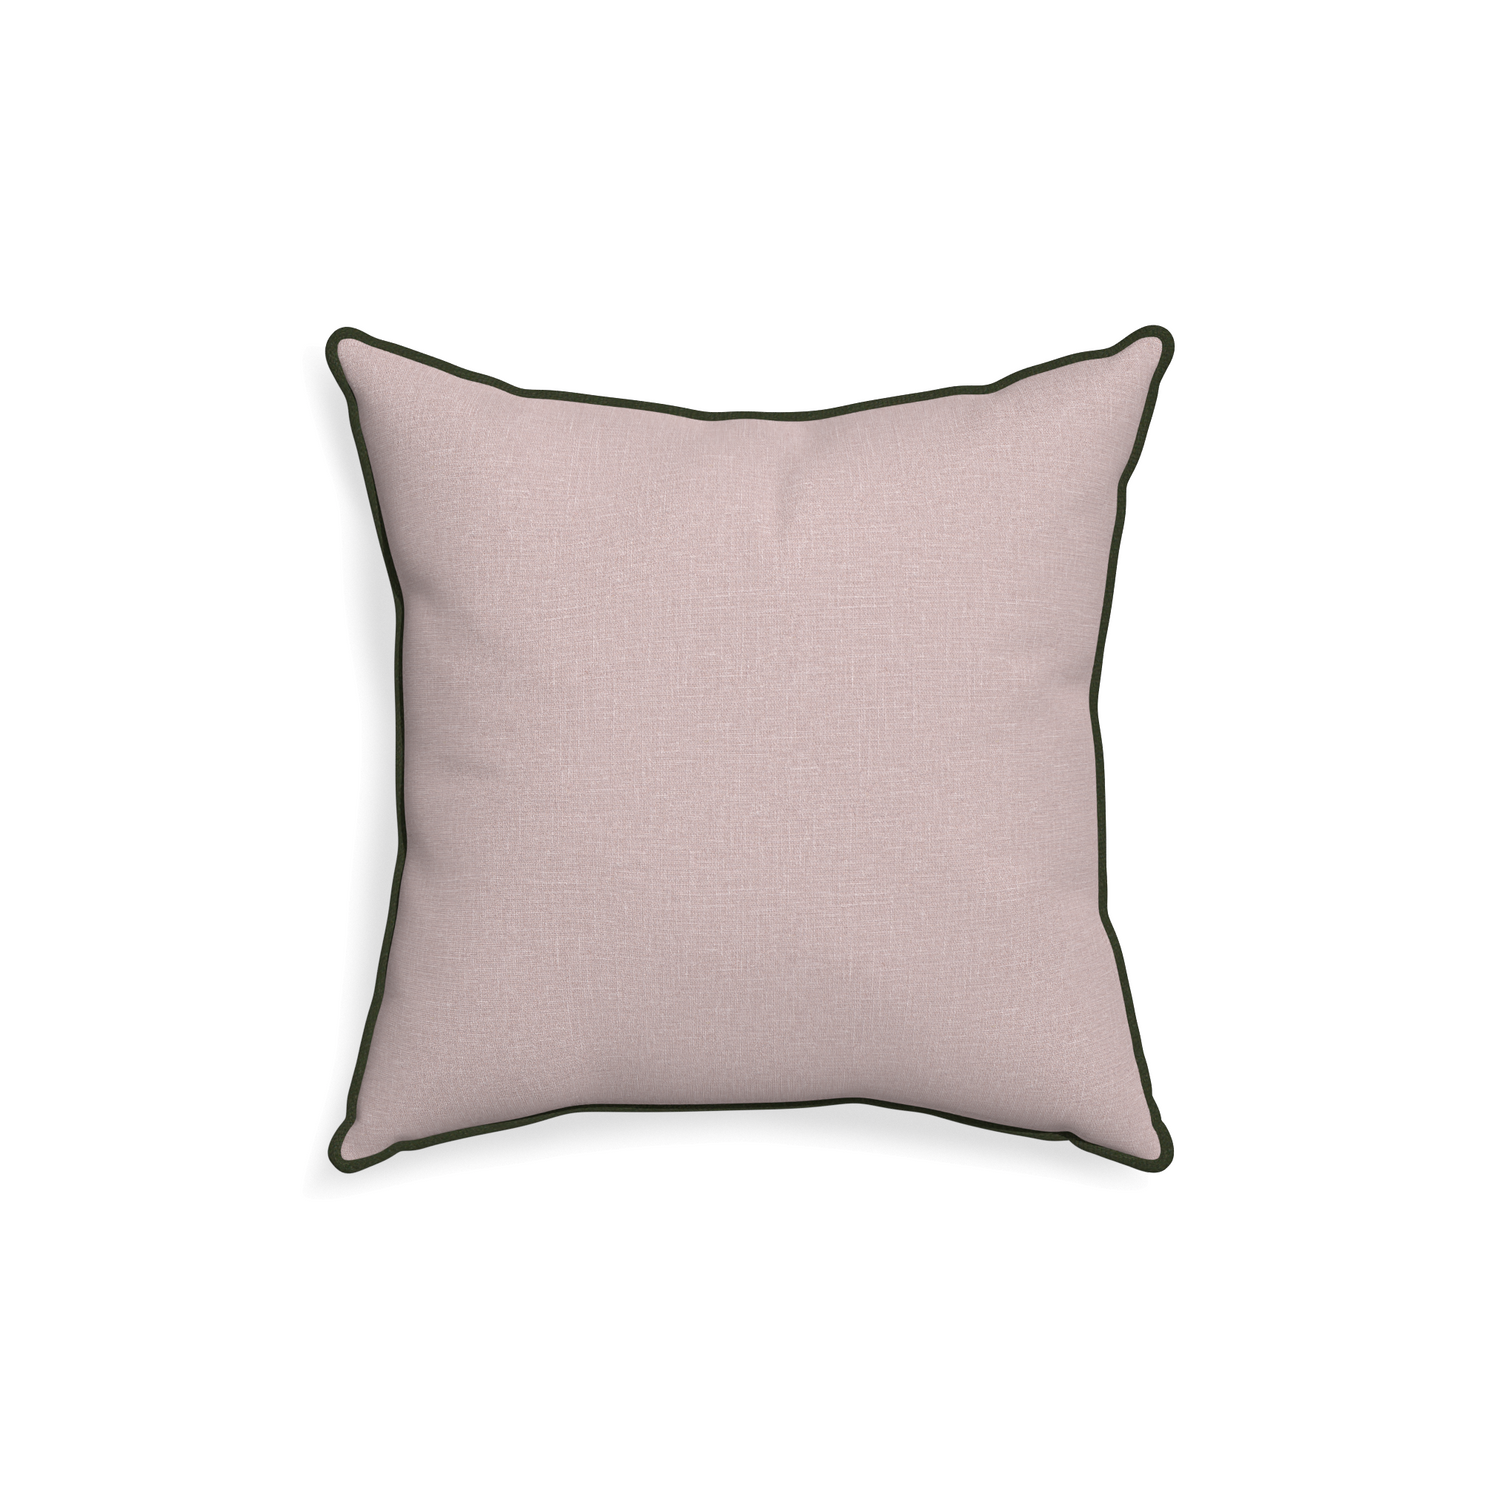 18-square orchid custom mauve pinkpillow with f piping on white background